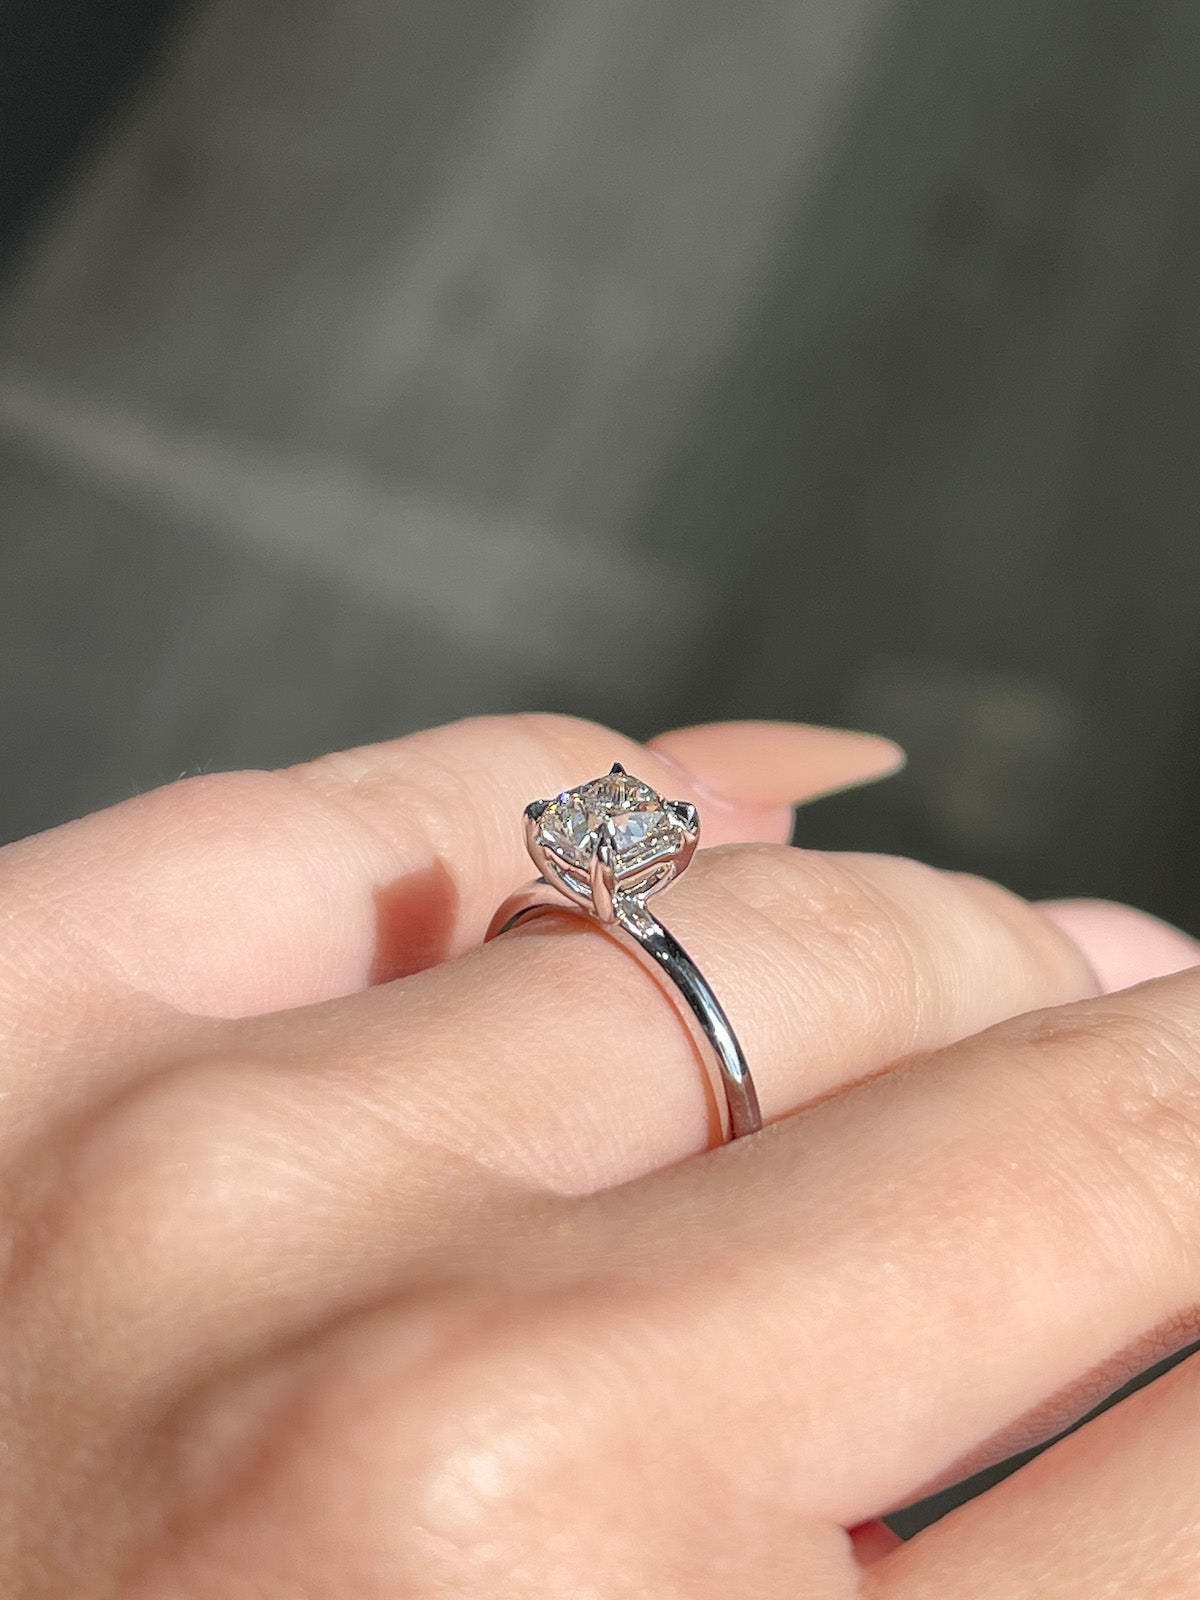 Load image into Gallery viewer, 1.01 Cushion Cut Diamond | D color SI1 clarity | Engagement Ring Wednesday - Happy Jewelers Fine Jewelry Lifetime Warranty
